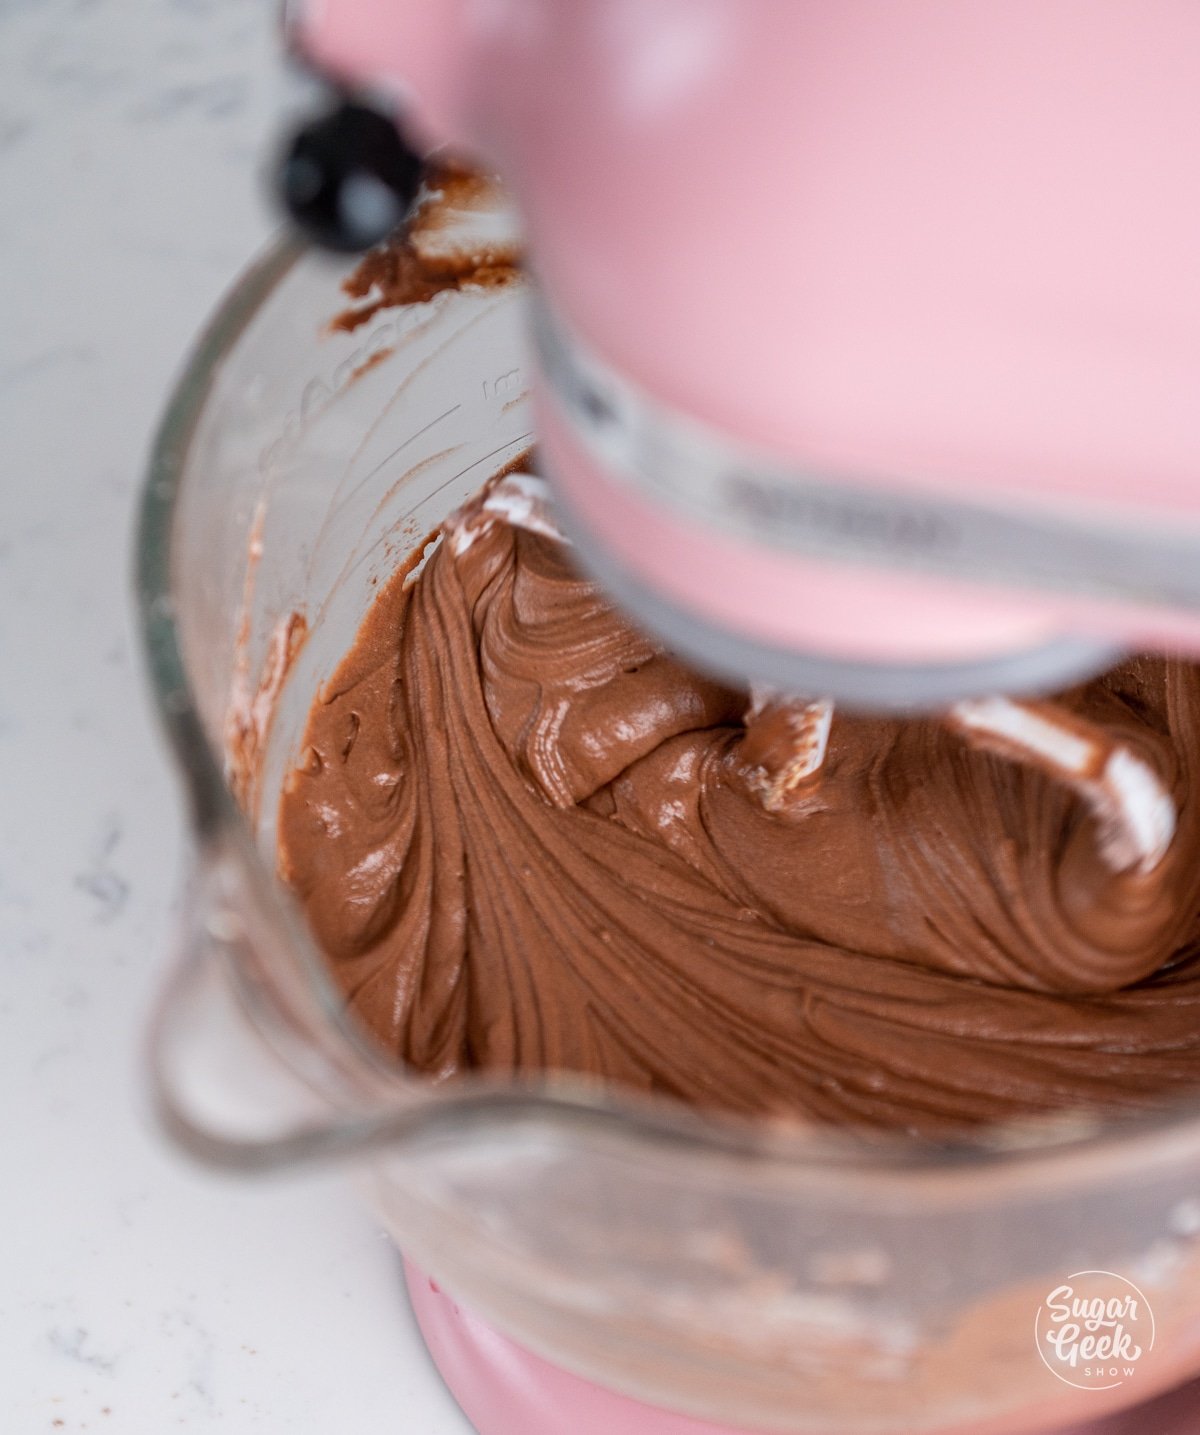 finished chocolate cupcake batter in the stand mixer.